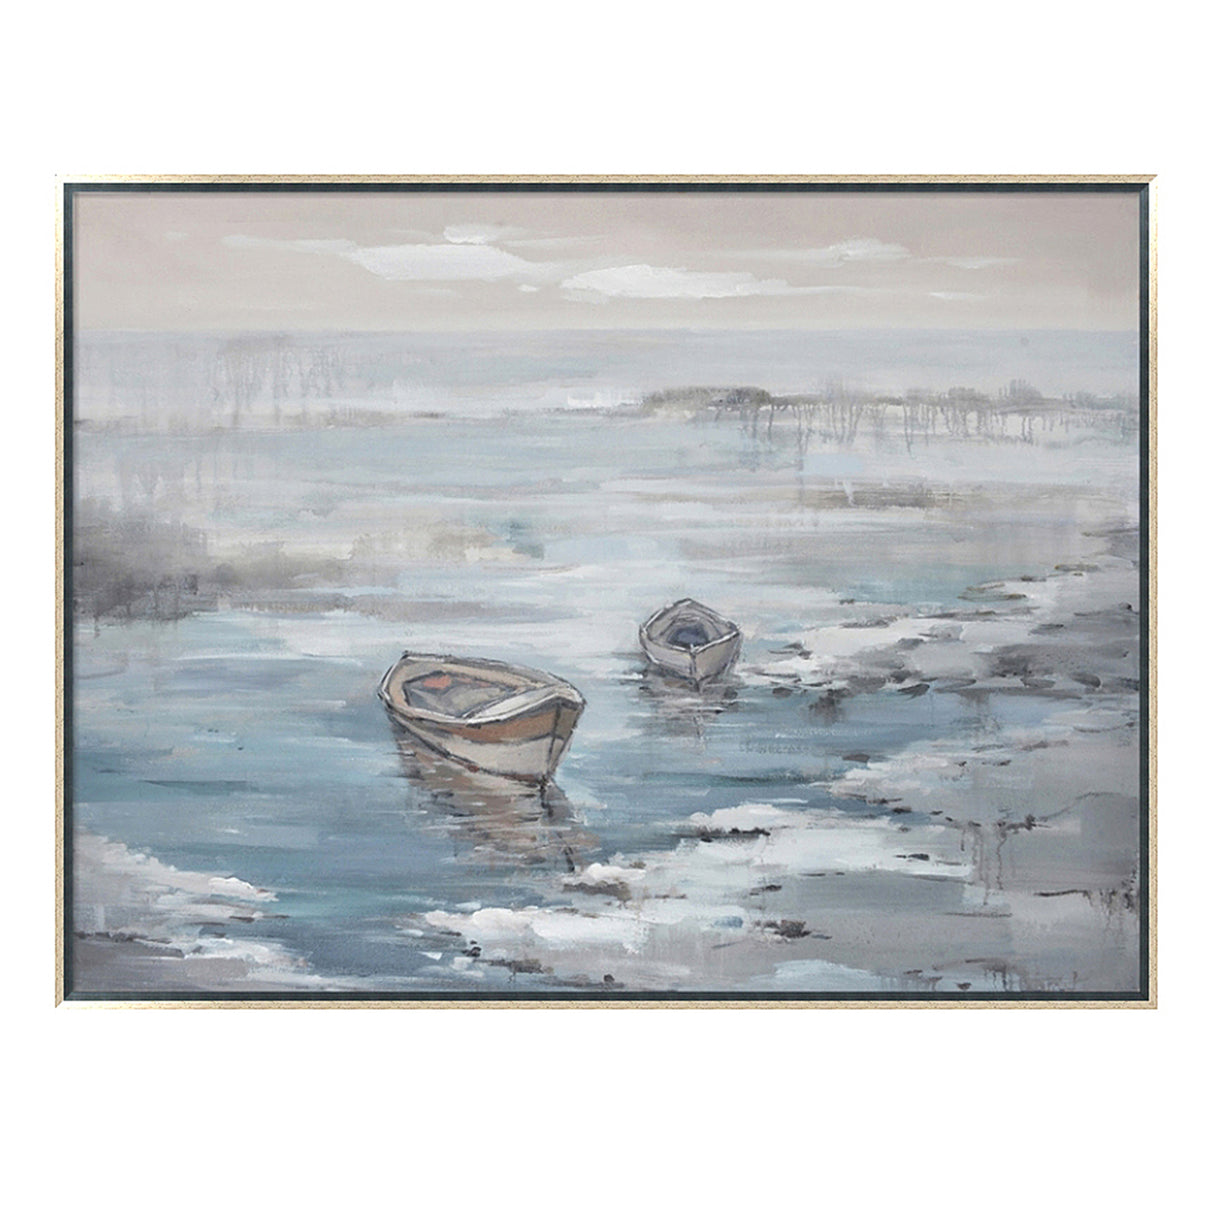 Hand Painted Acrylic Wall Art Ocean with Boats on a 47 x 35 Rectangular Canvas with a Silver Wooden Frame